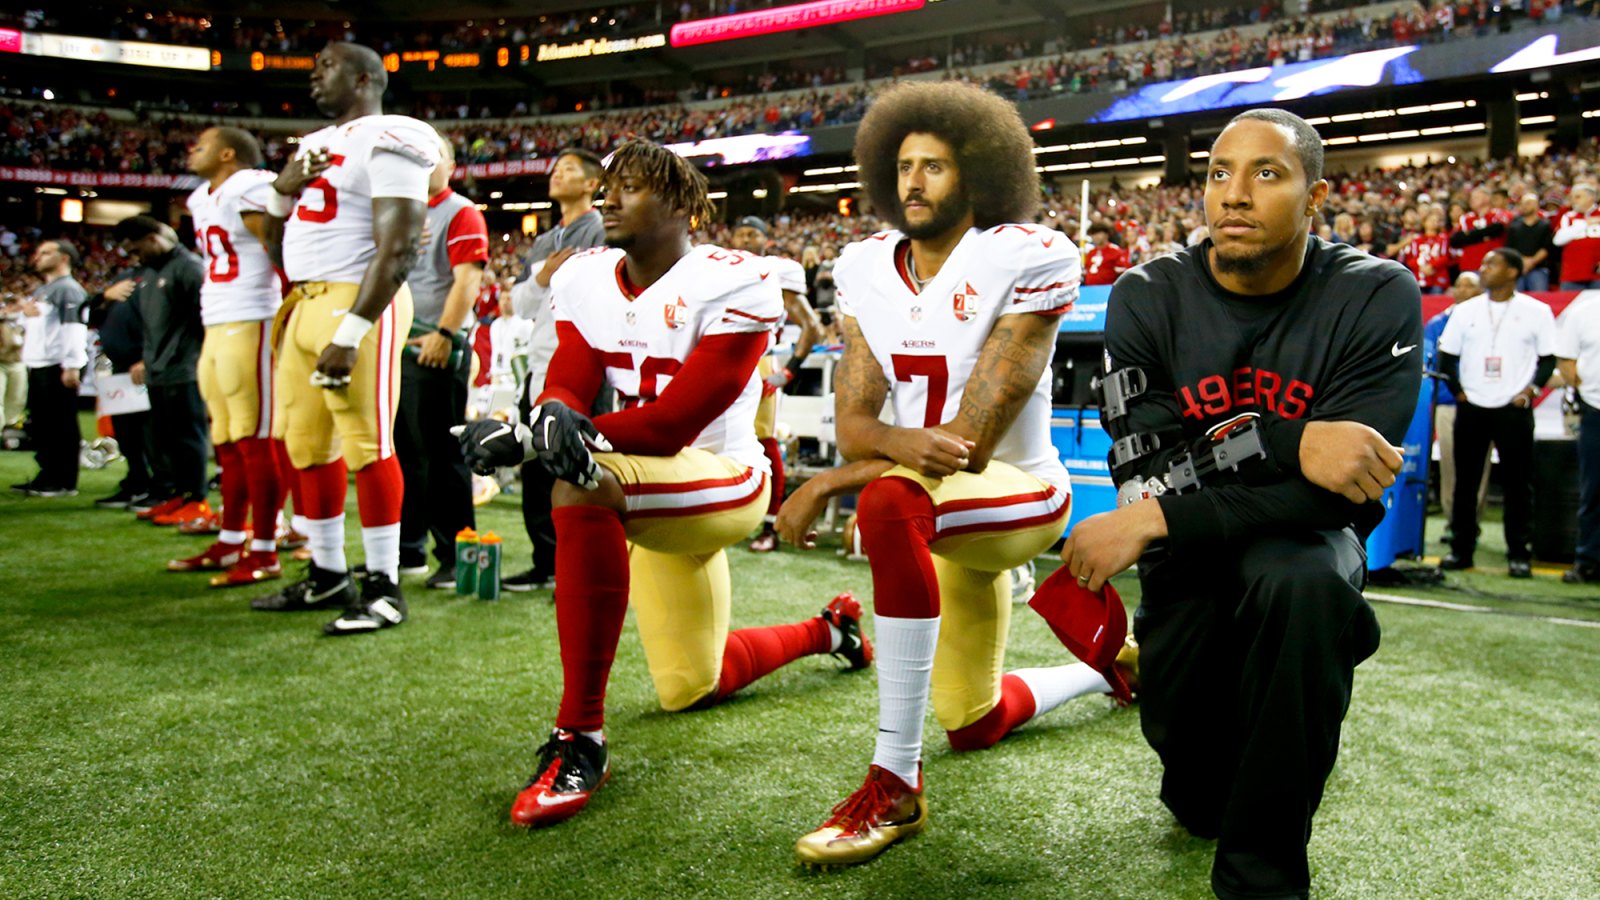 Colin Kaepernick #7 of the San Francisco 49ers kneel on the sideline, during the anthem, prior to the game against the Atlanta Falcons at the Georgia Dome on December 18, 2016 in Atlanta, Georgia.